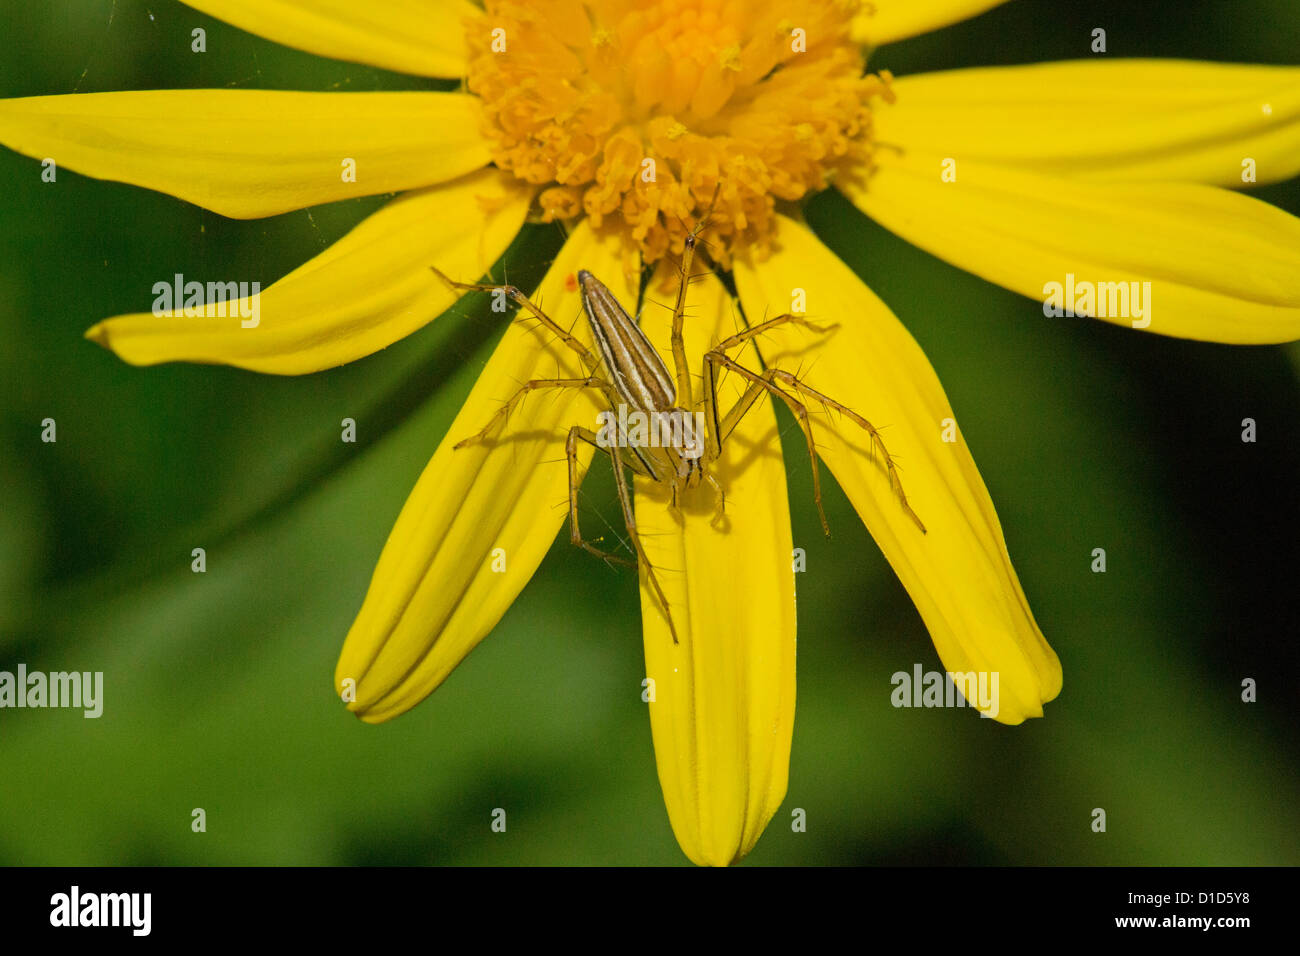 Spider - Oxyoped species - Australian spider with striped pattern on body on petals of yellow flower Stock Photo